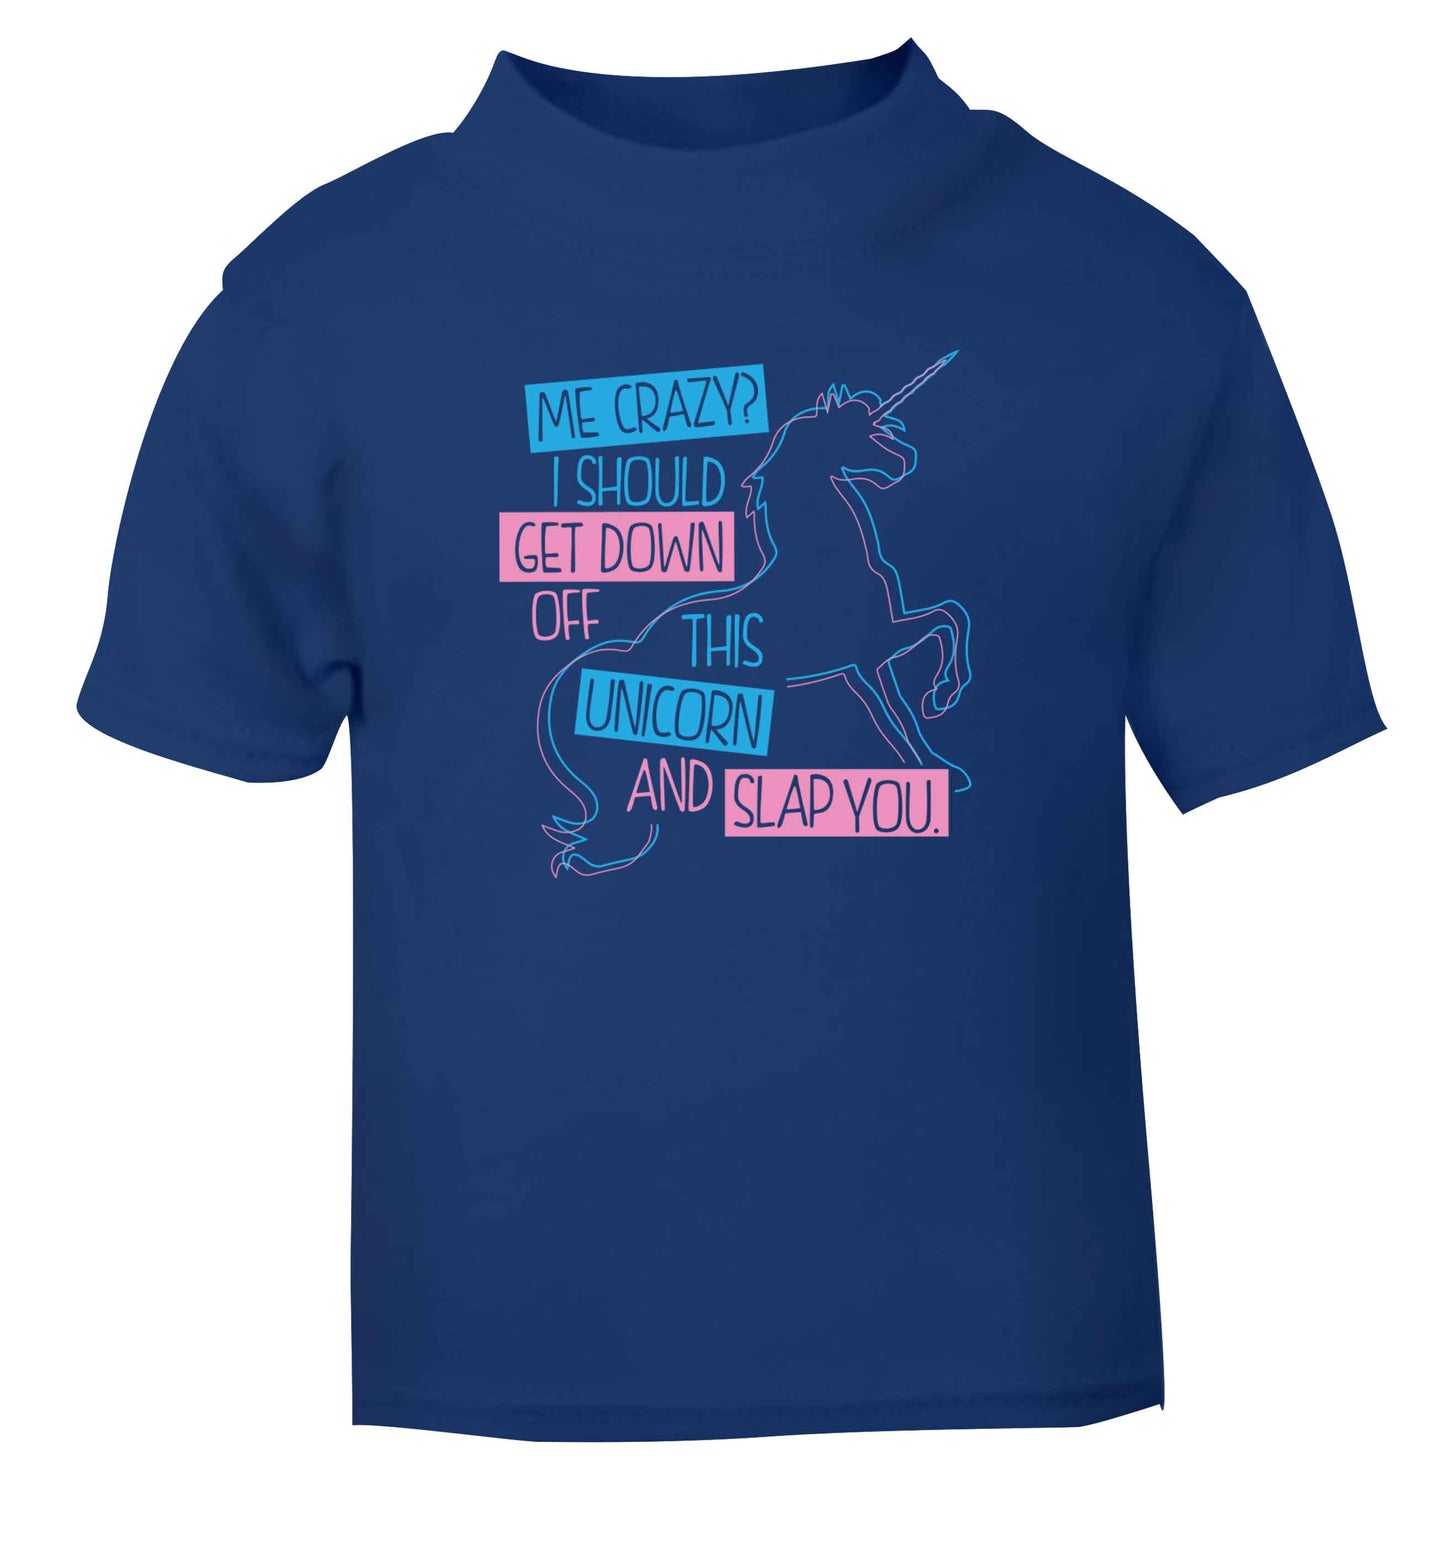 Me crazy? I should get down off this unicorn and slap you blue Baby Toddler Tshirt 2 Years